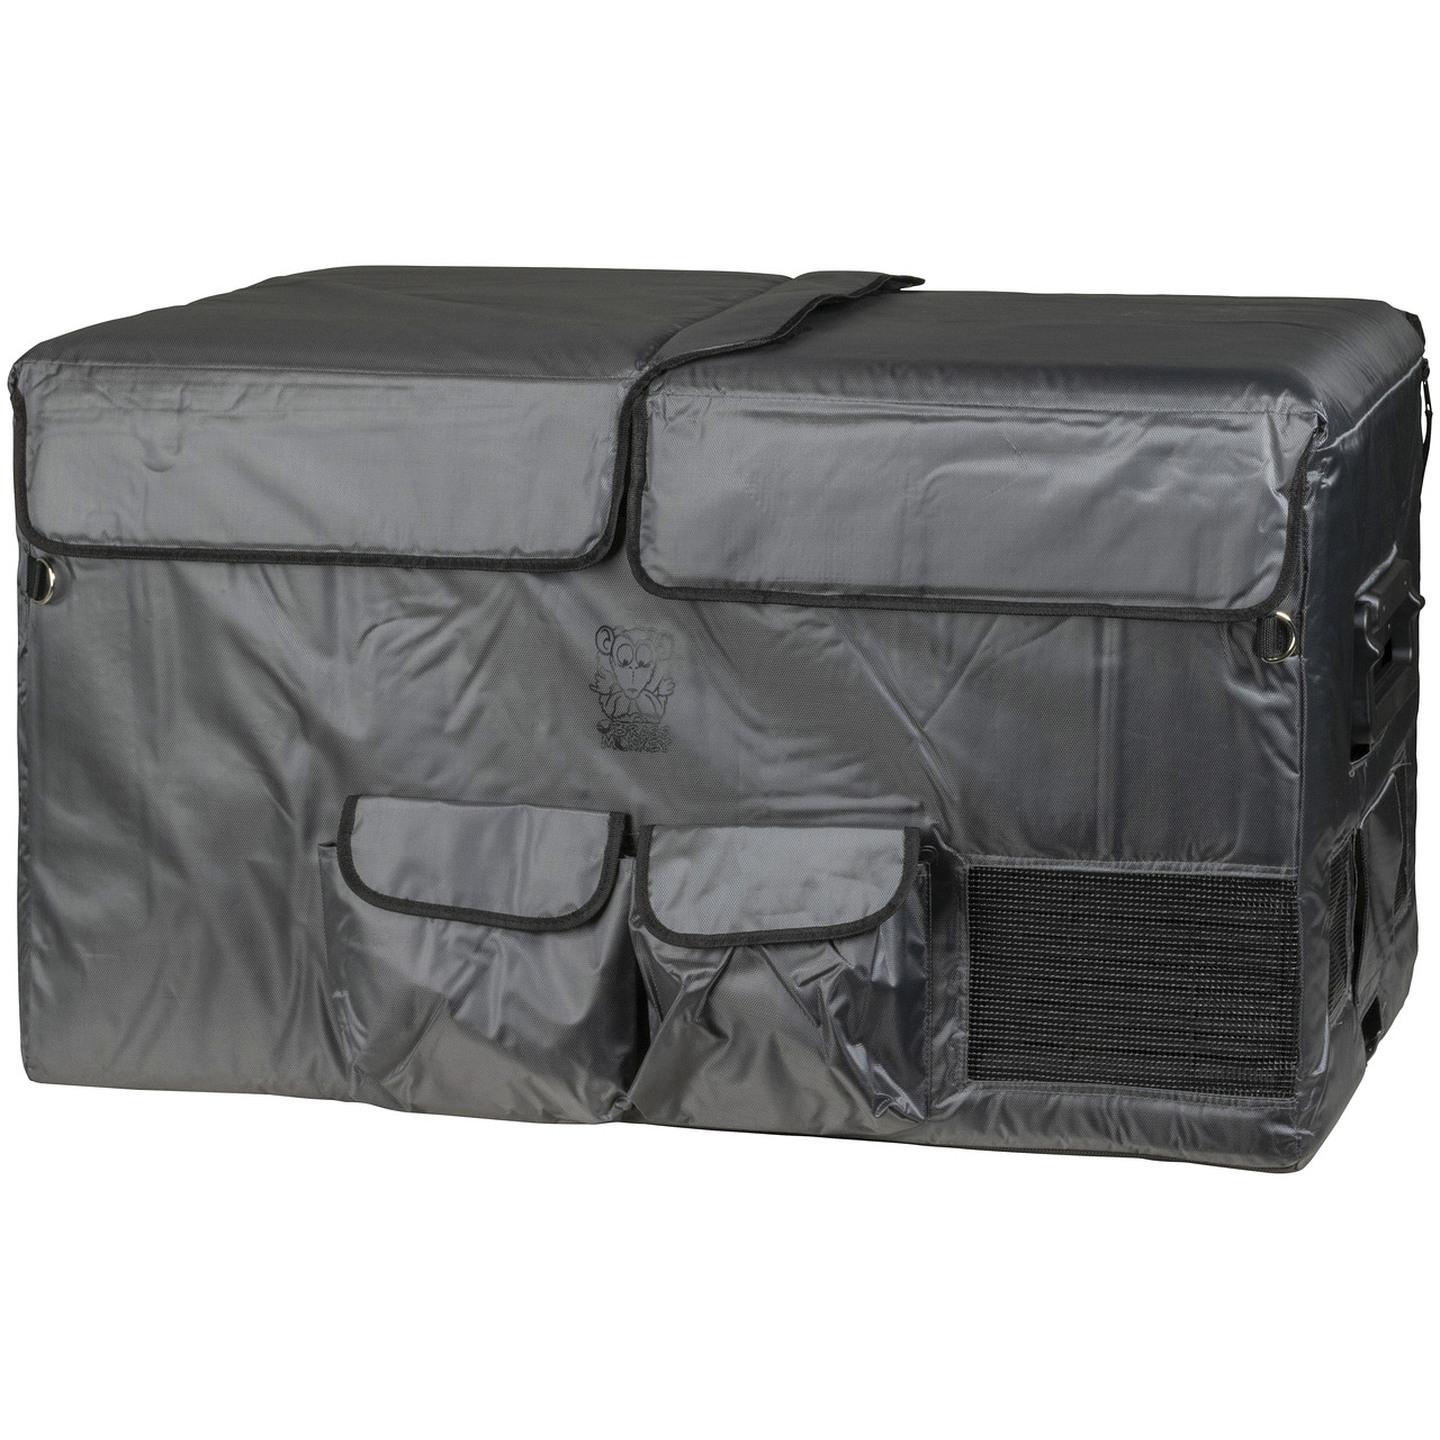 Grey Insulated Cover for 75L Brass Monkey Portable Fridge/Freezer